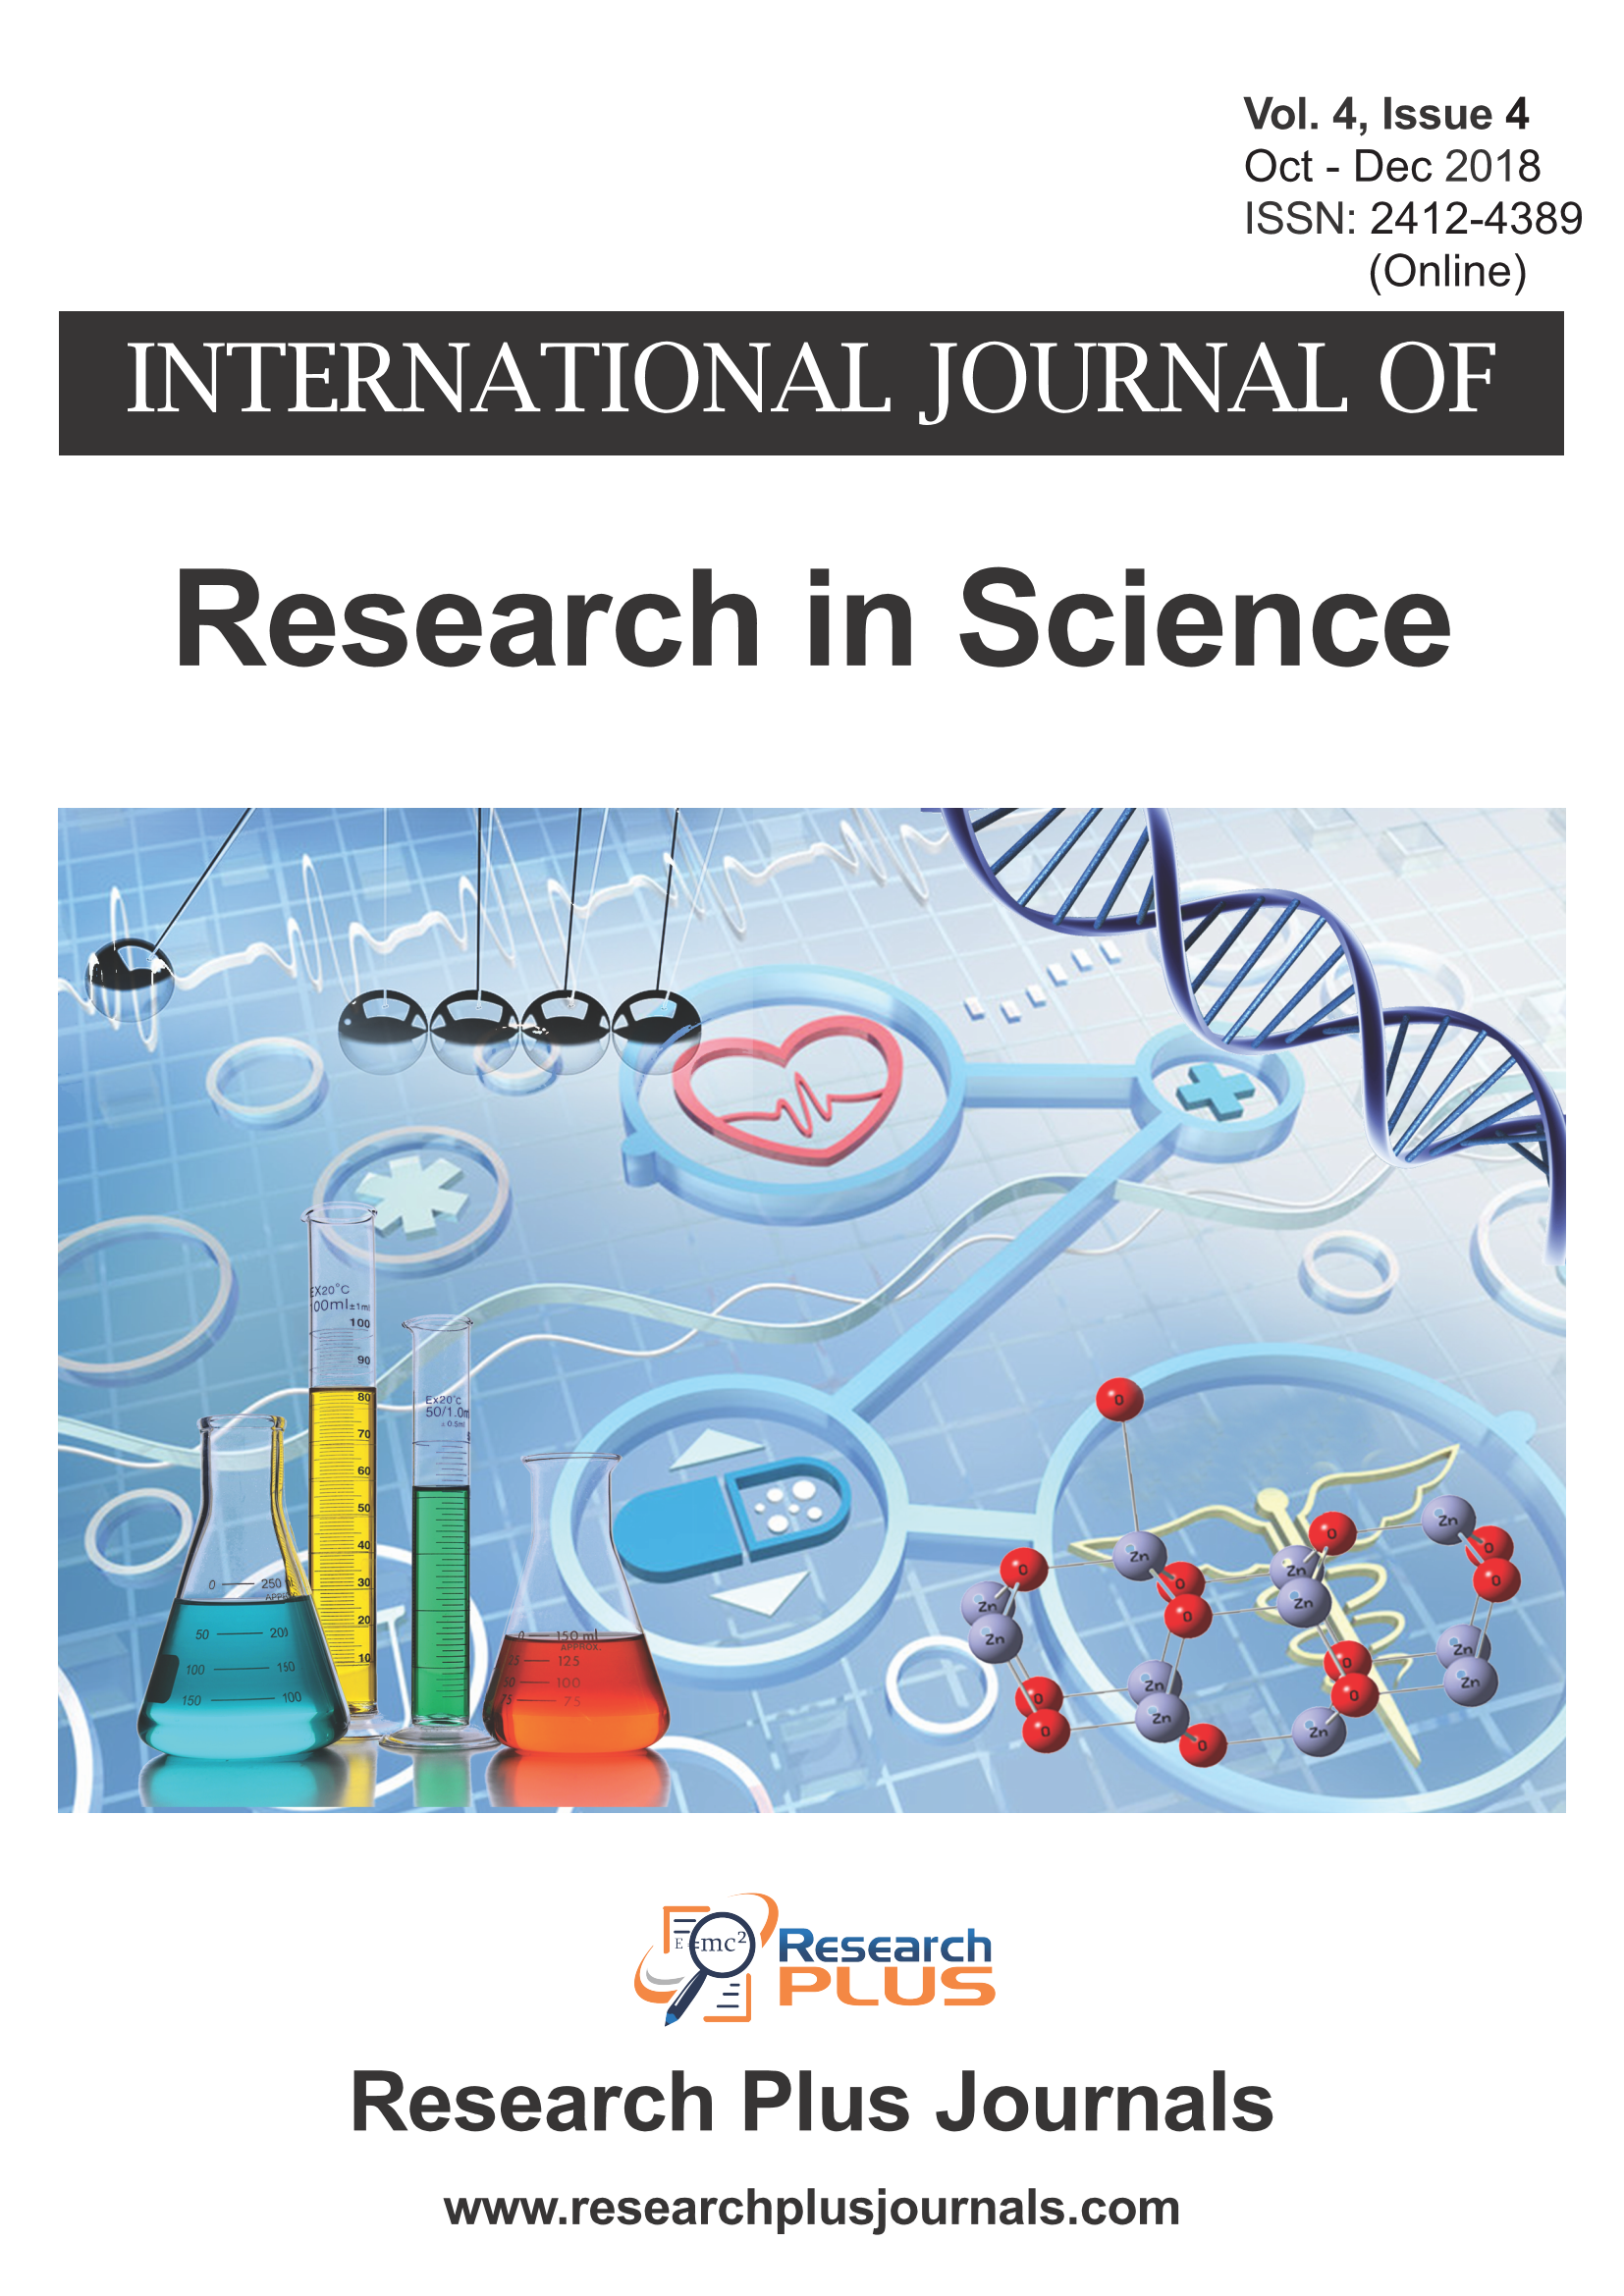 Volume 4, Issue 4, International Journal of Research in Science (IJRS) (Online ISSN 2412-4389)